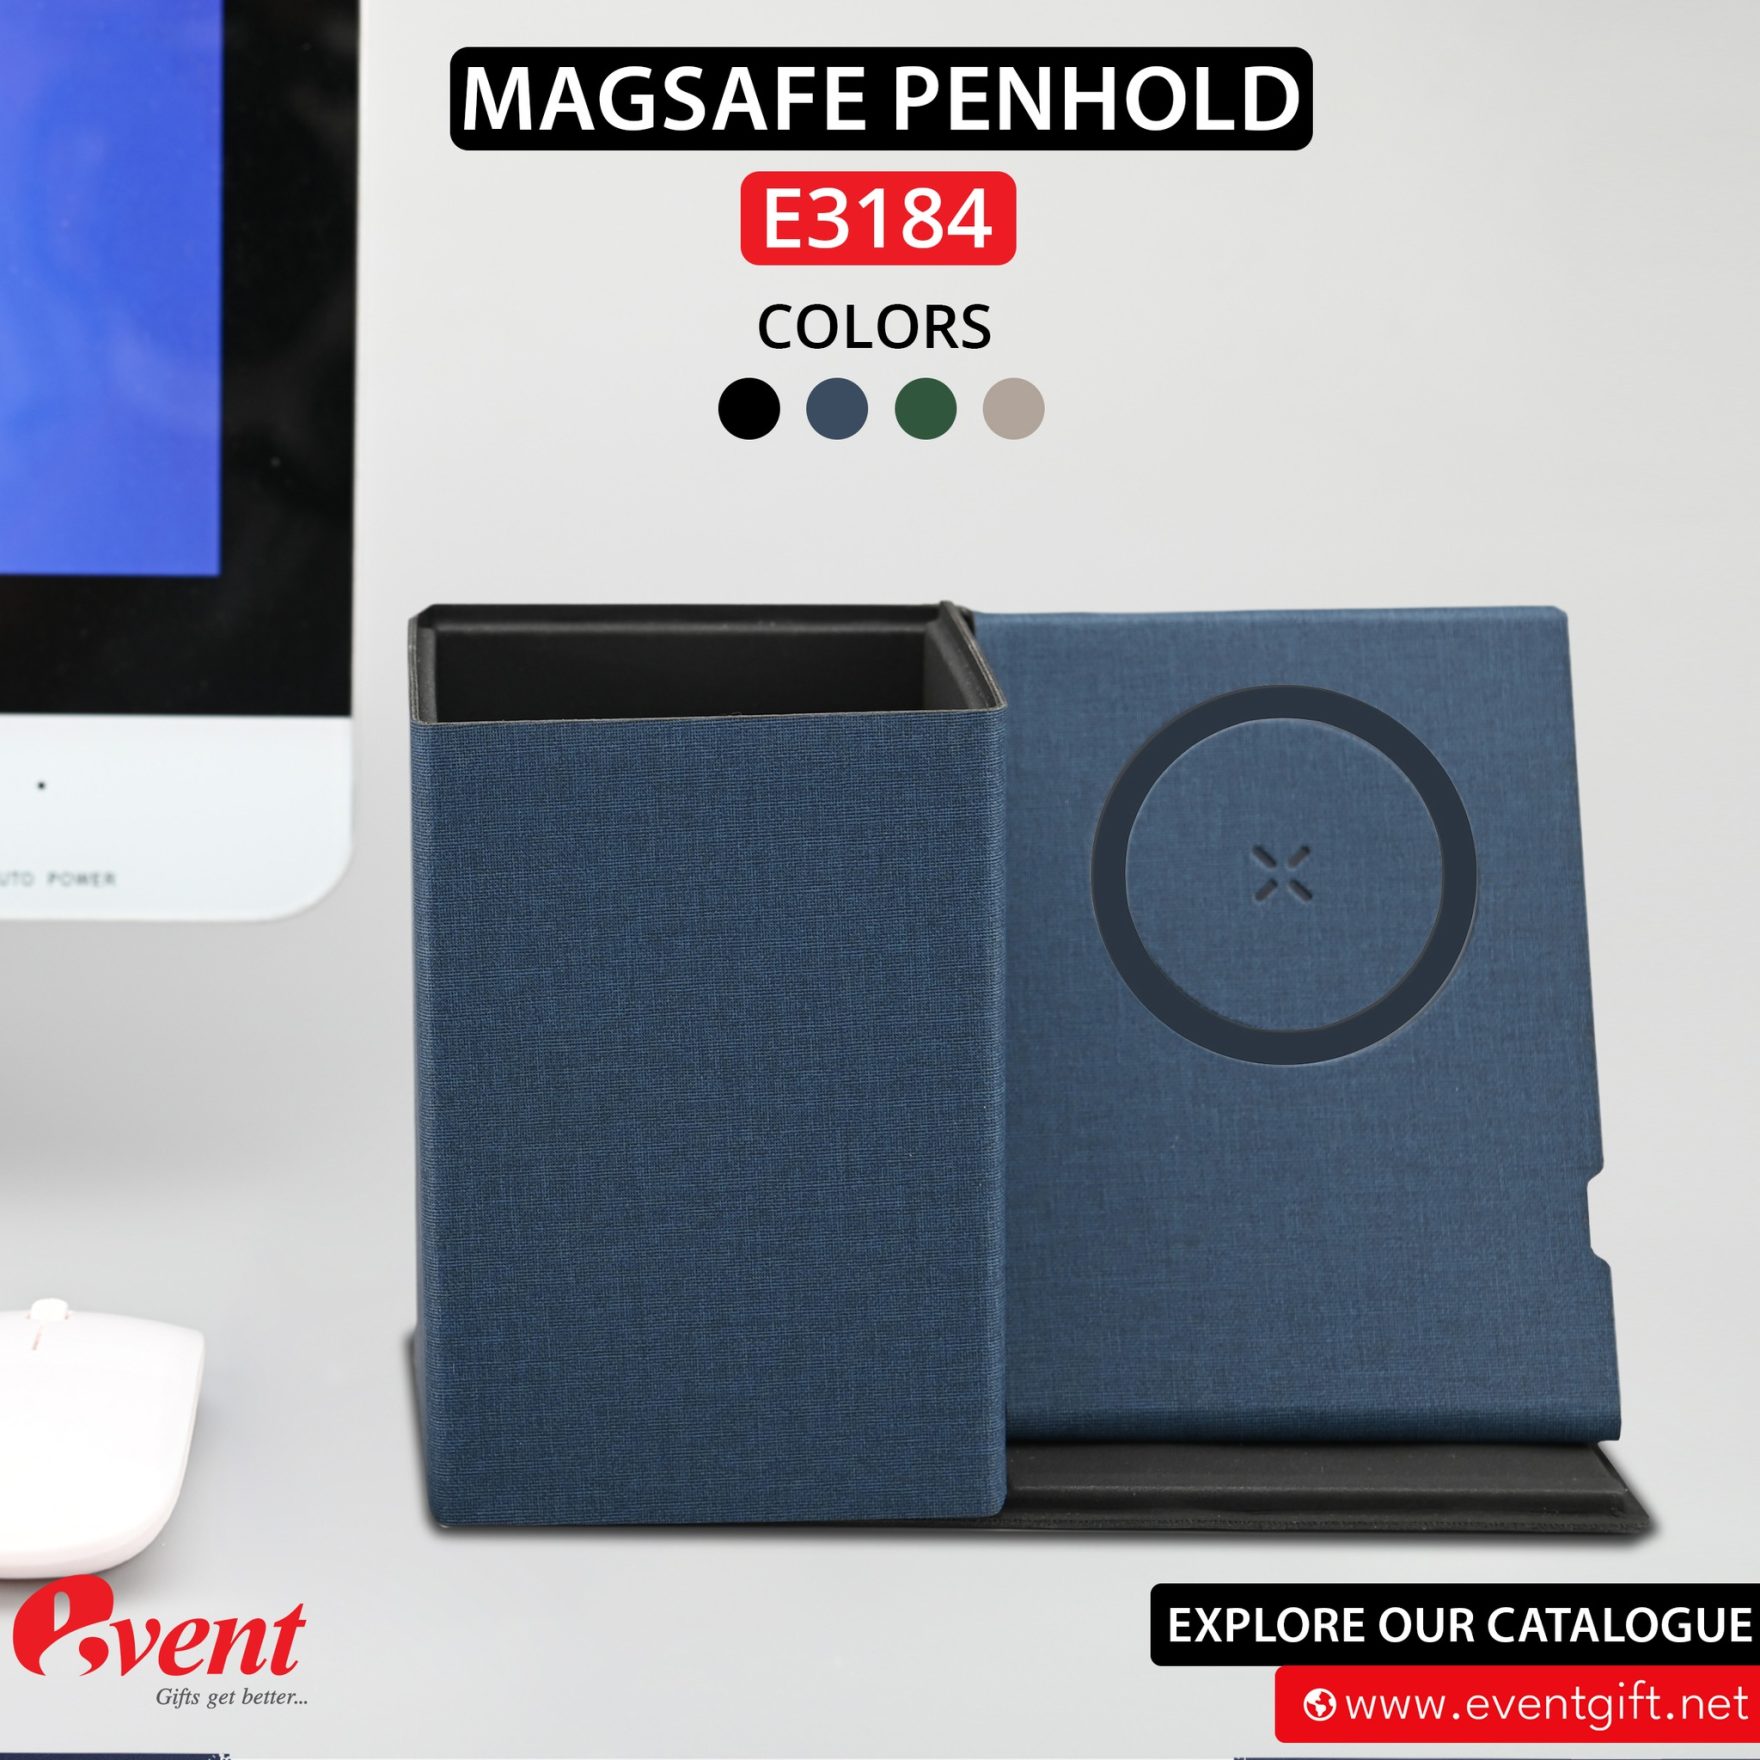 MAGSAFE PENHOLD,Event Gift